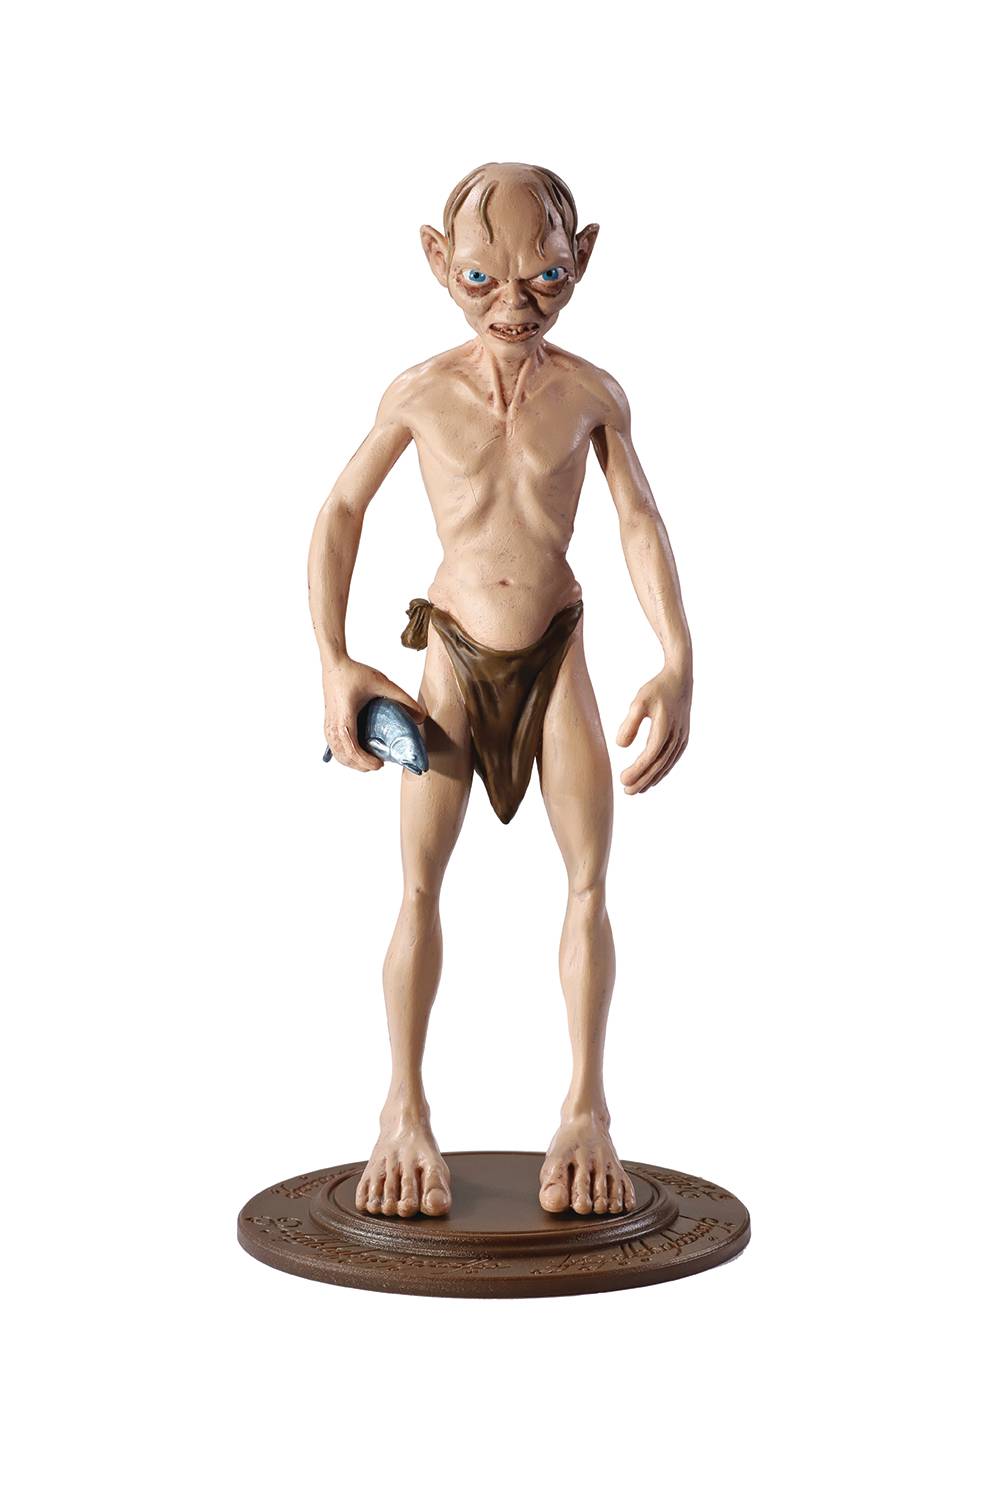 LORD OF THE RINGS GOLLUM BENDY FIGURE